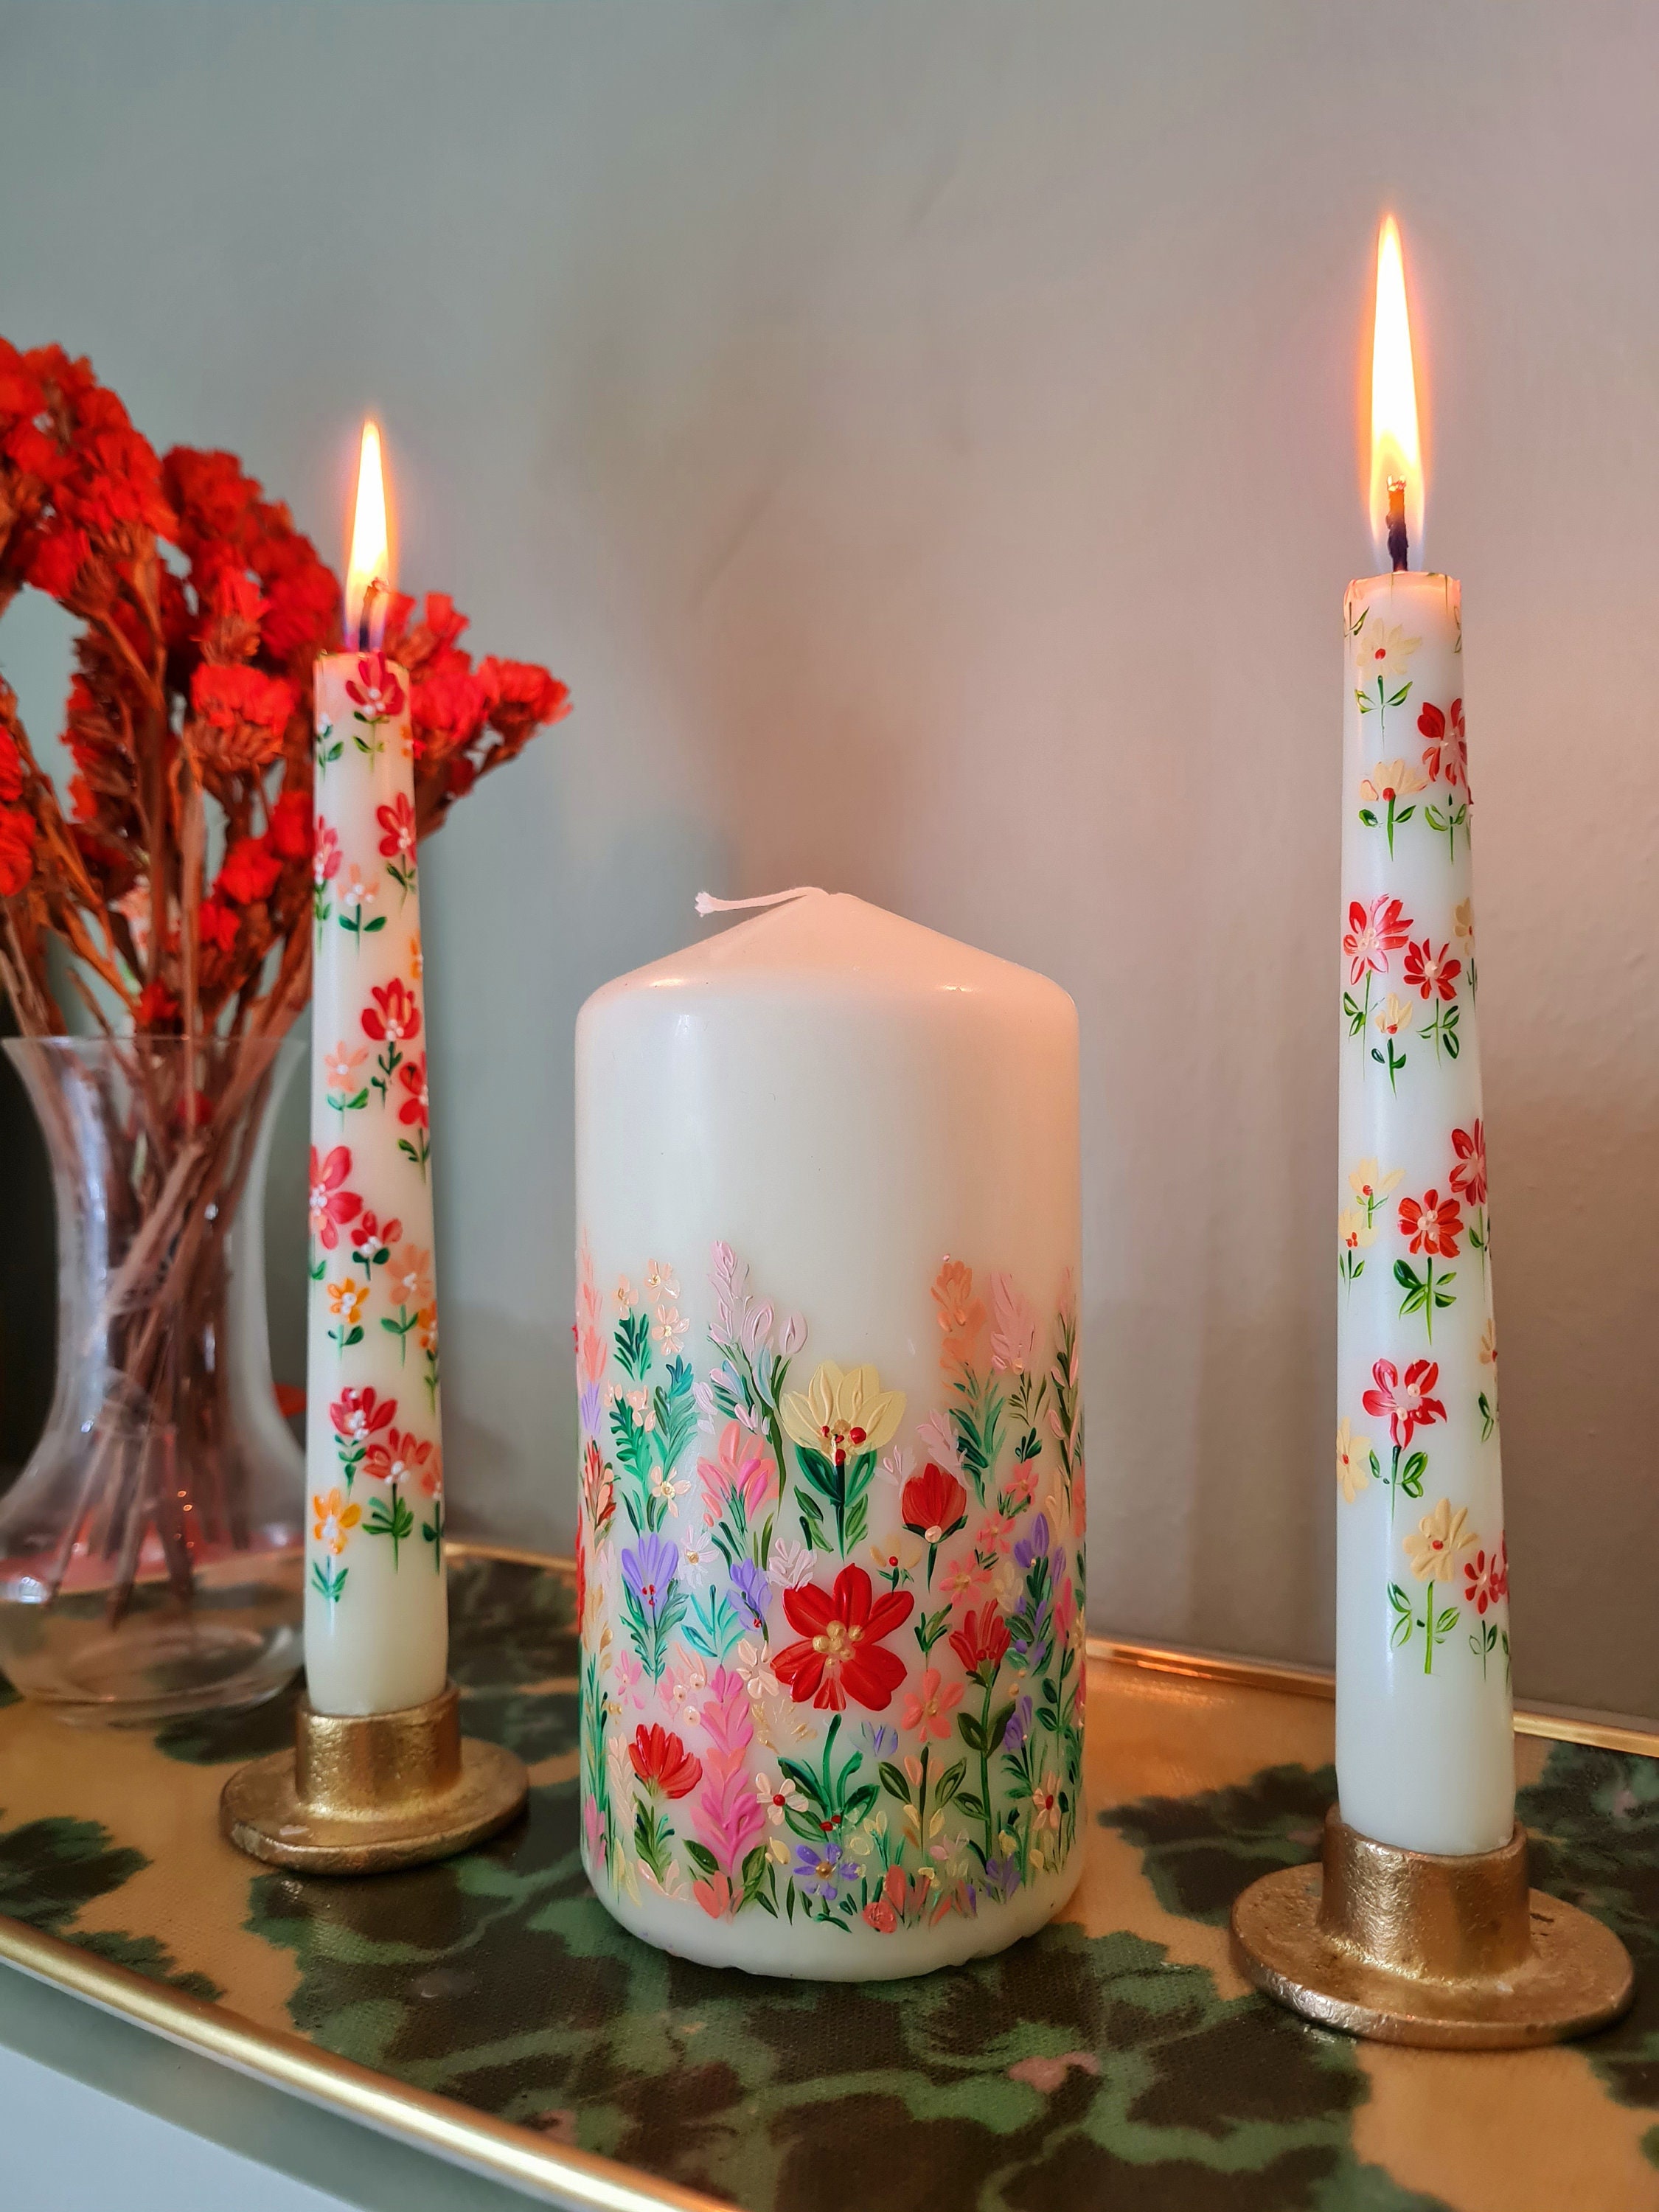 Flower Painted Candle. Painted Candle. Floral Painted Pillar Candle. Pillar  Candle. Wedding Candle. Hand Painted Candle. Painted Pillar. -  Denmark